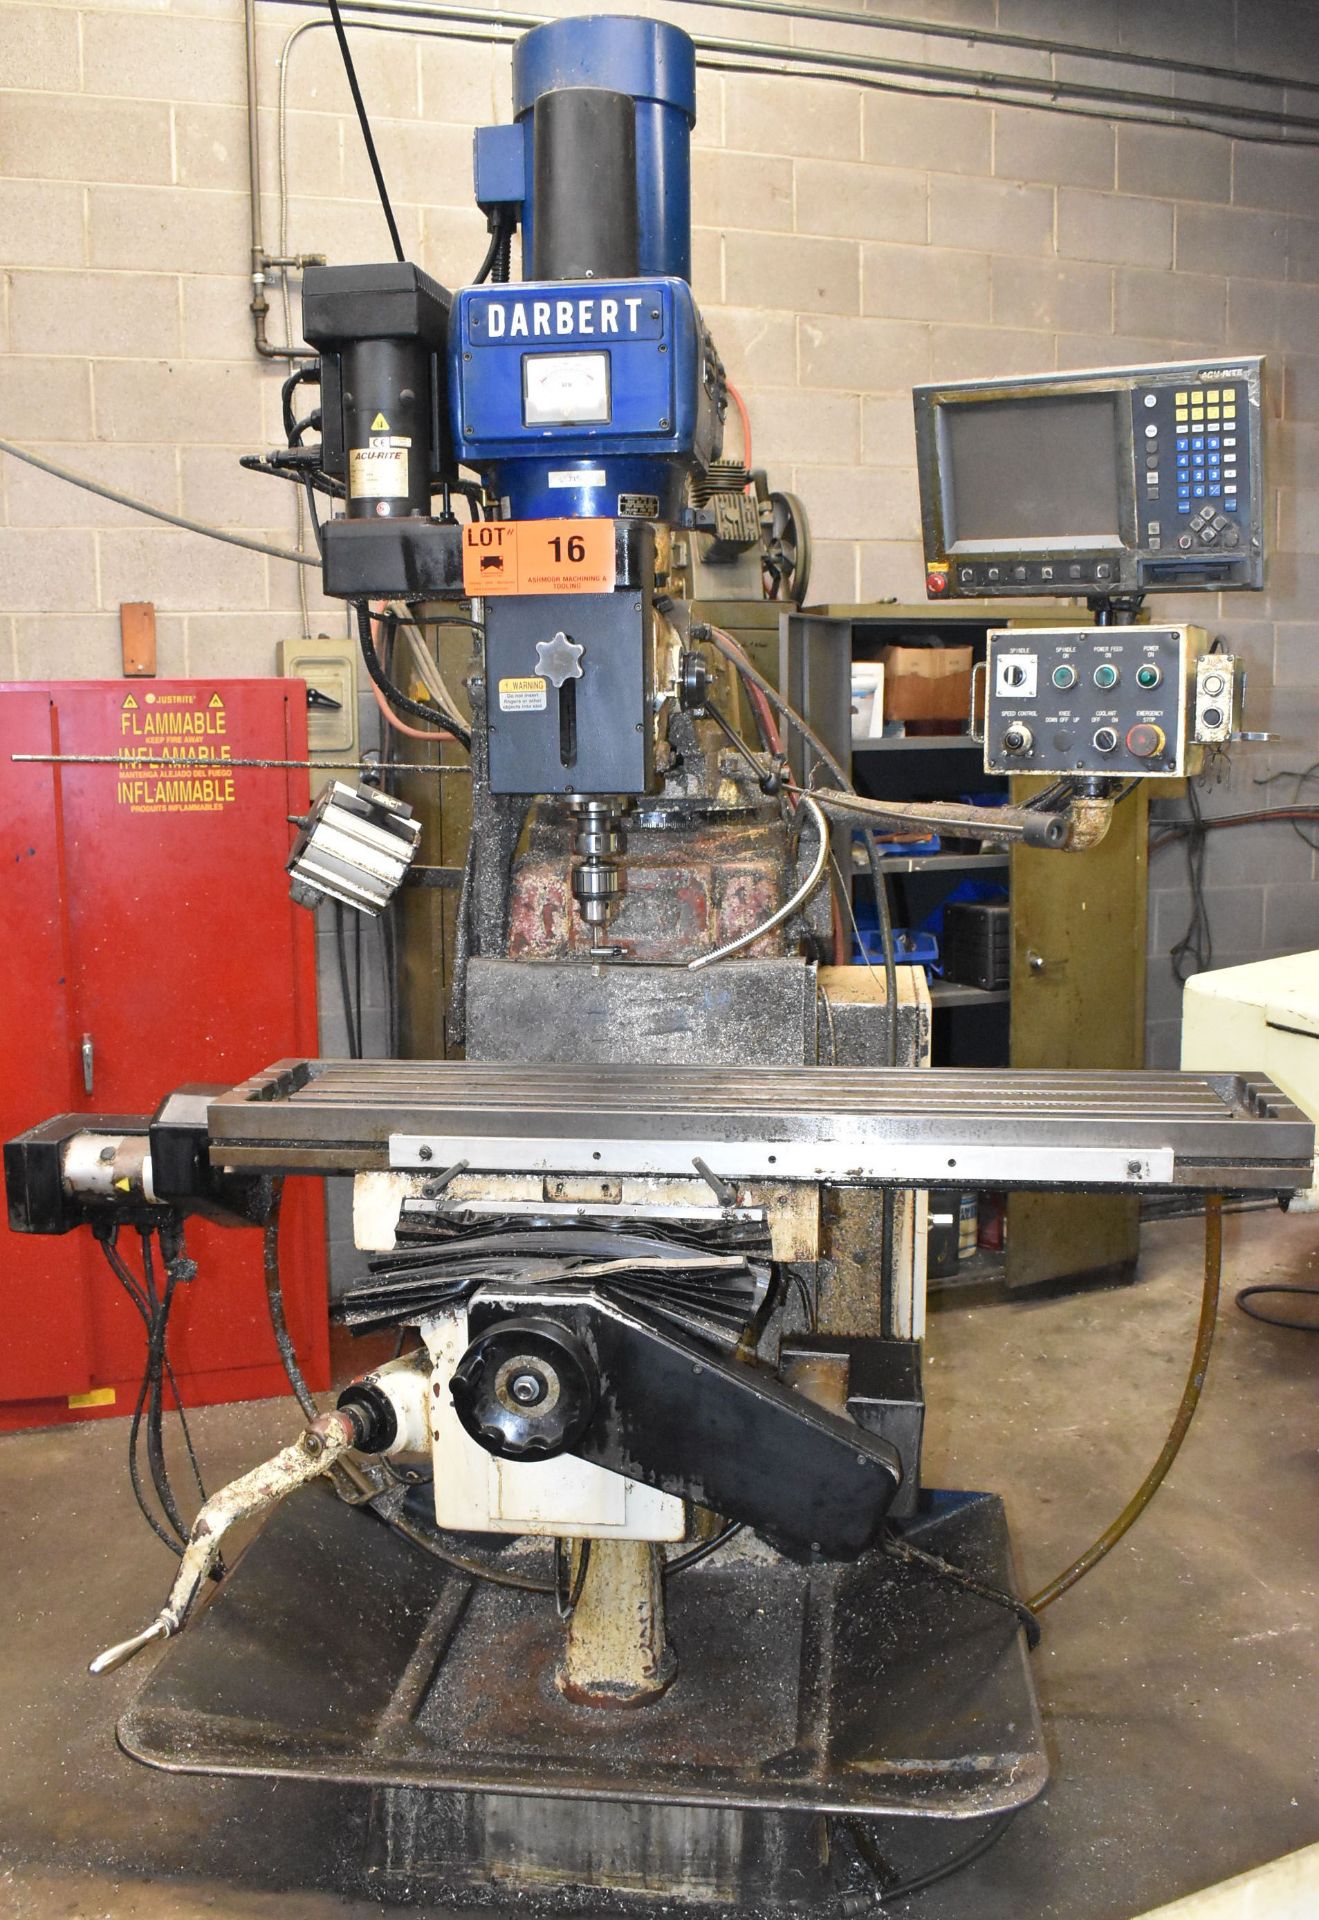 DARBERT CNC VERTICAL MILLING MACHINE WITH ACU-RITE CNC CONTROL, 54" X 12" TABLE, SPEEDS TO 6000 RPM, - Image 2 of 12